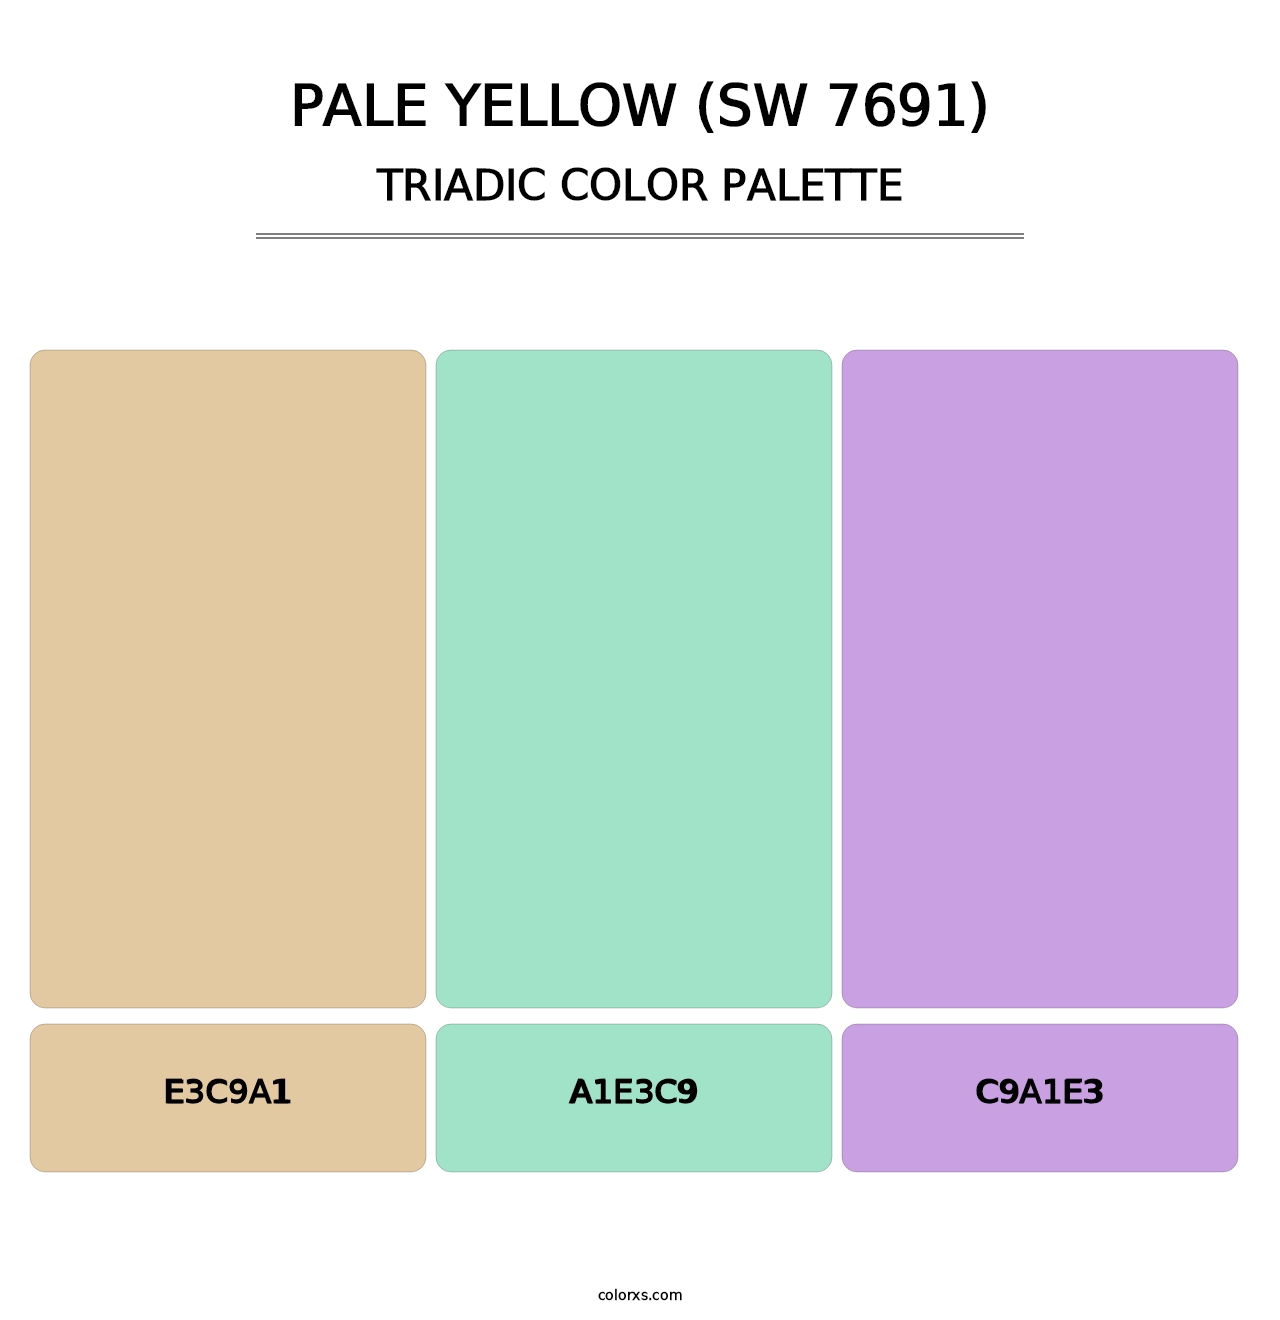 Pale Yellow (SW 7691) - Triadic Color Palette